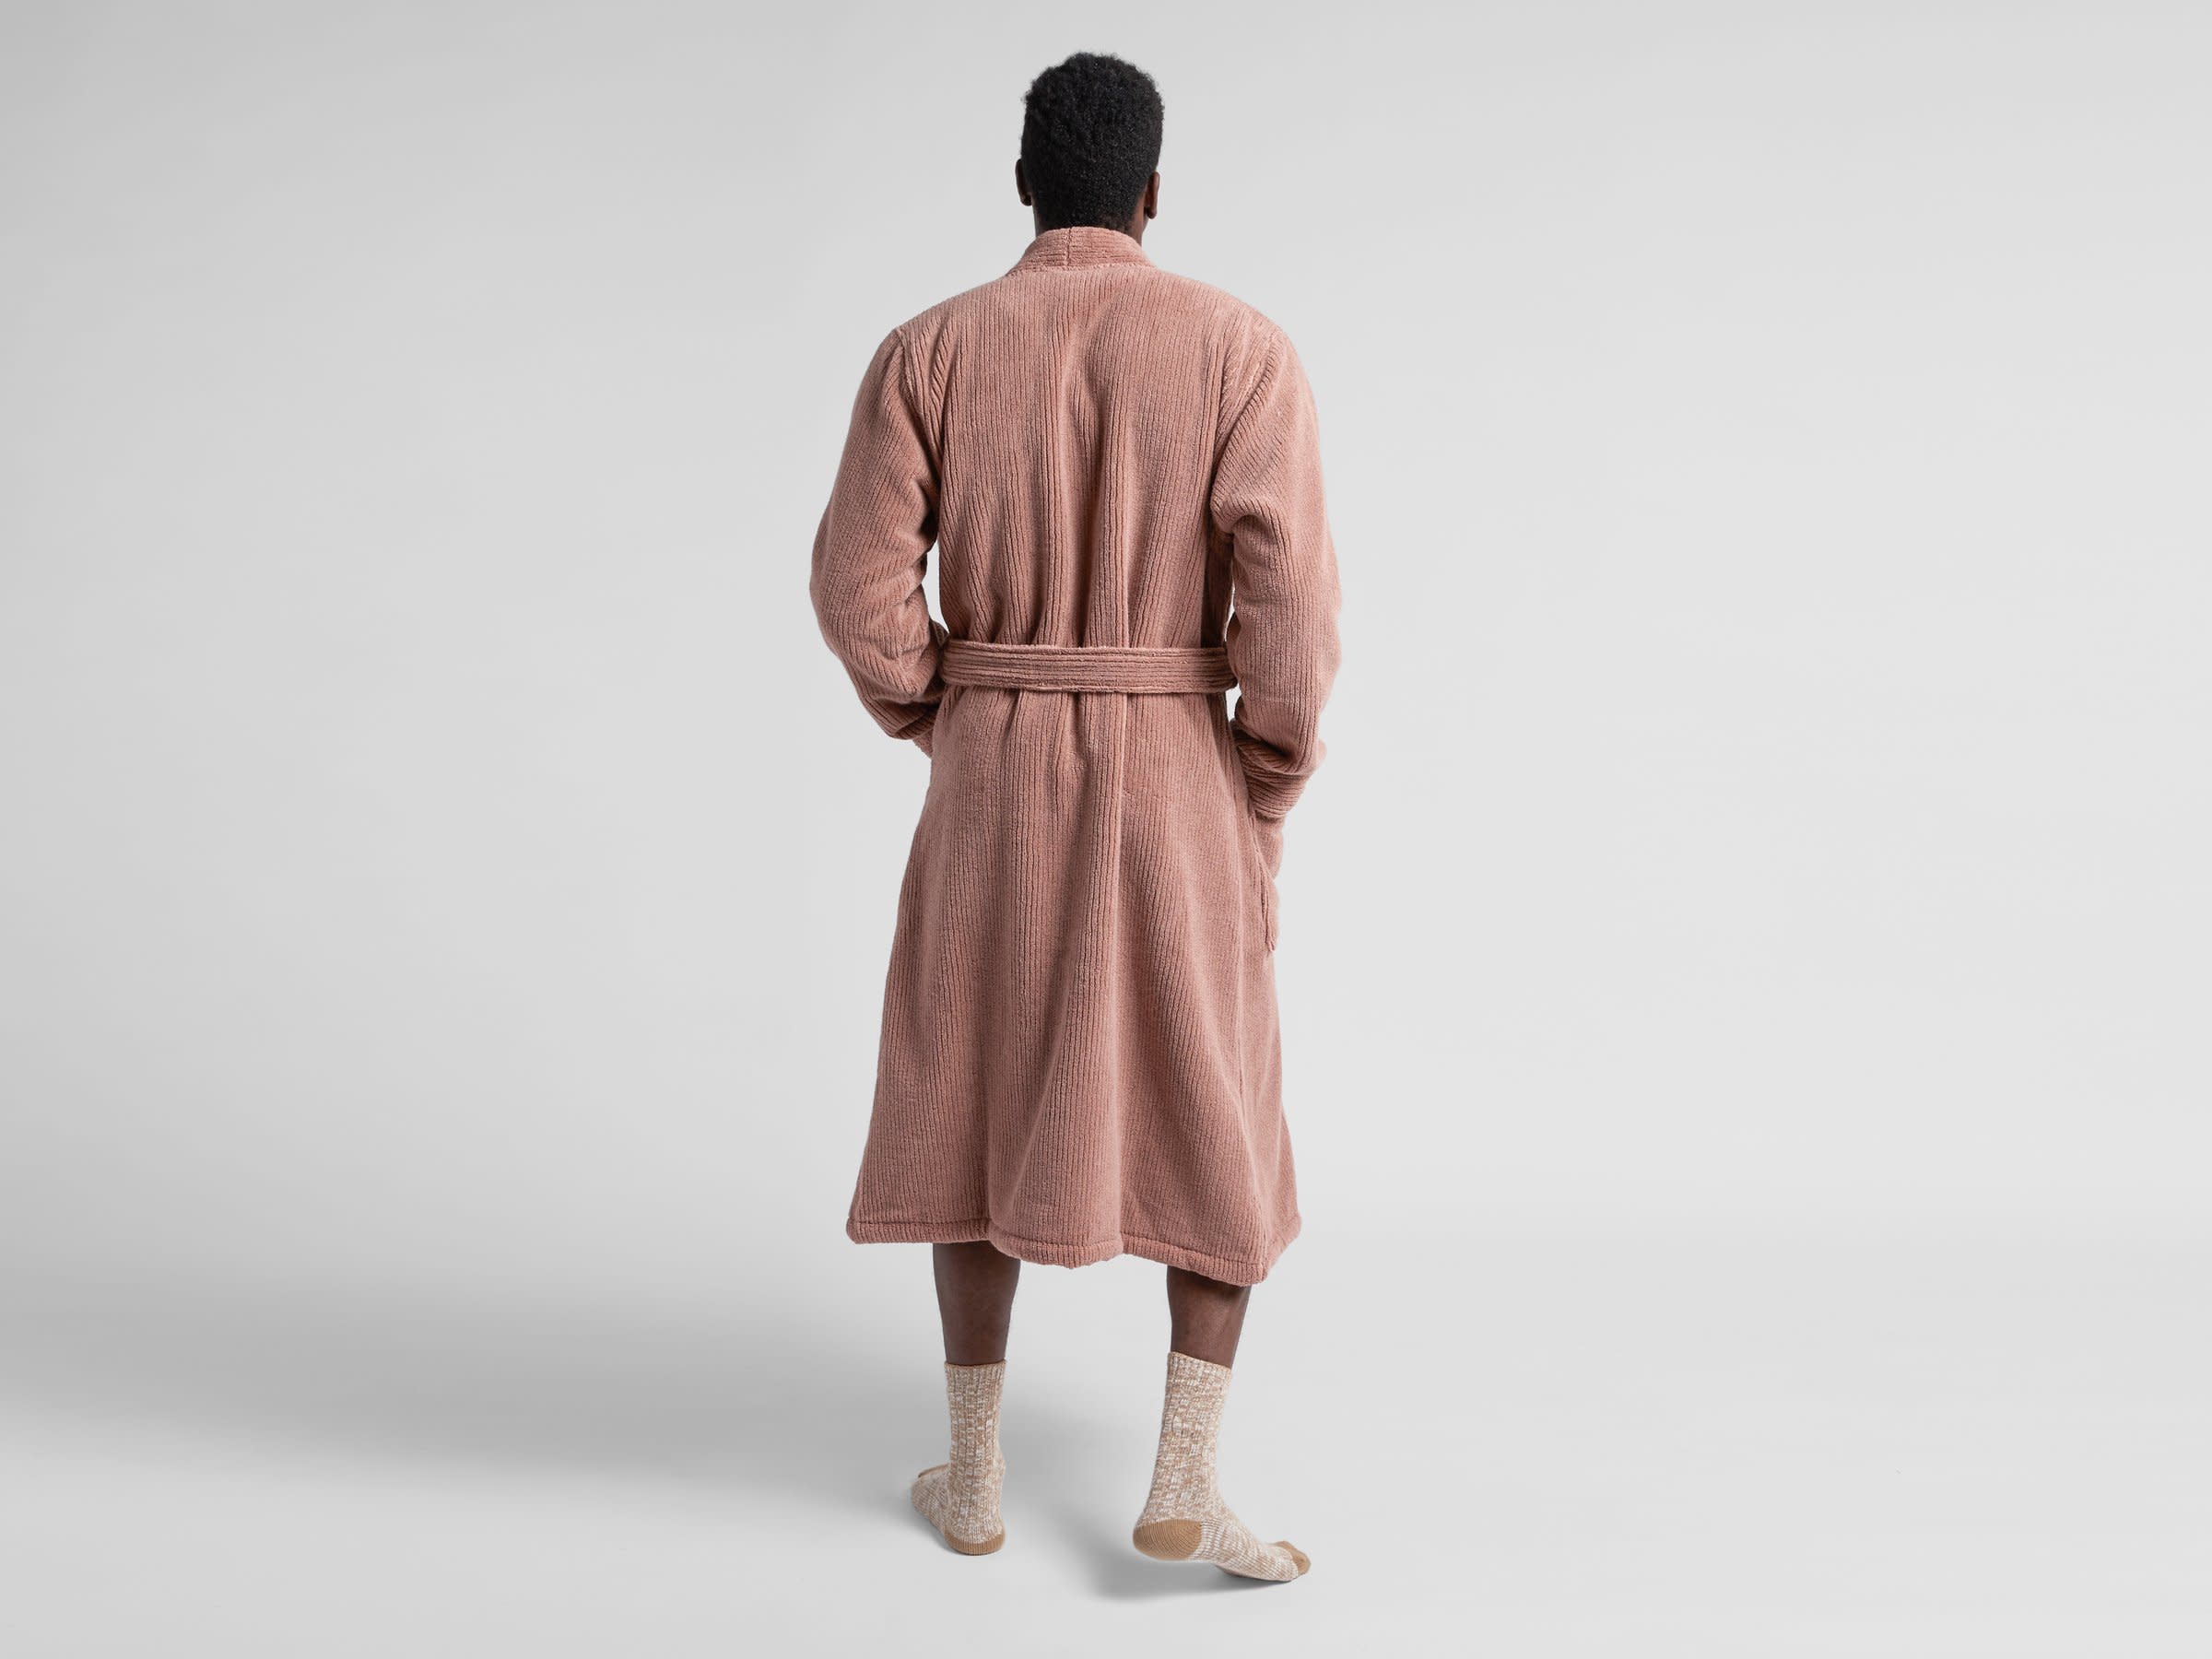 Clay Soft Rib Robe Shown In A Room